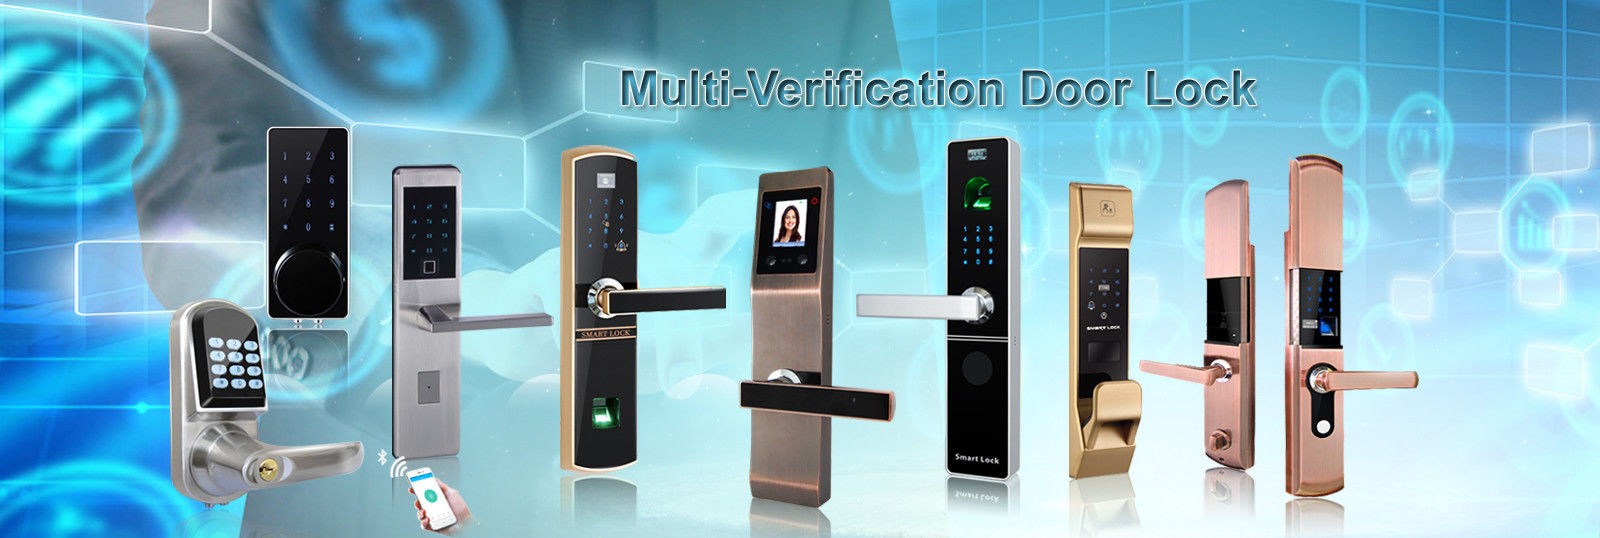 quality Smart Home Security Alarm System factory